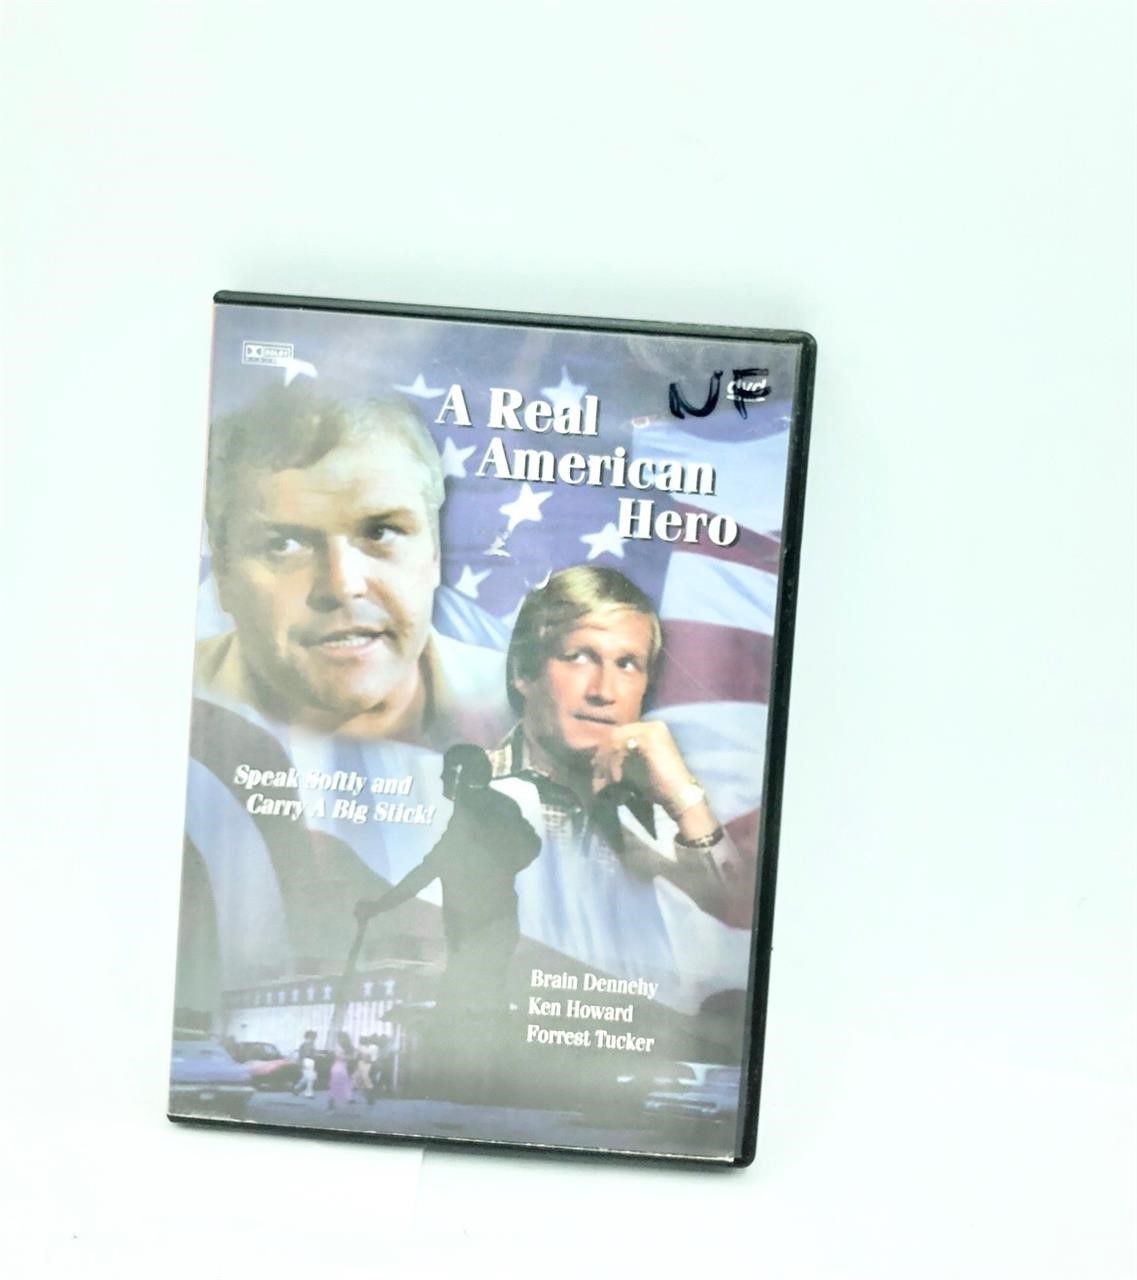 A real American Hero DVD previously viewed